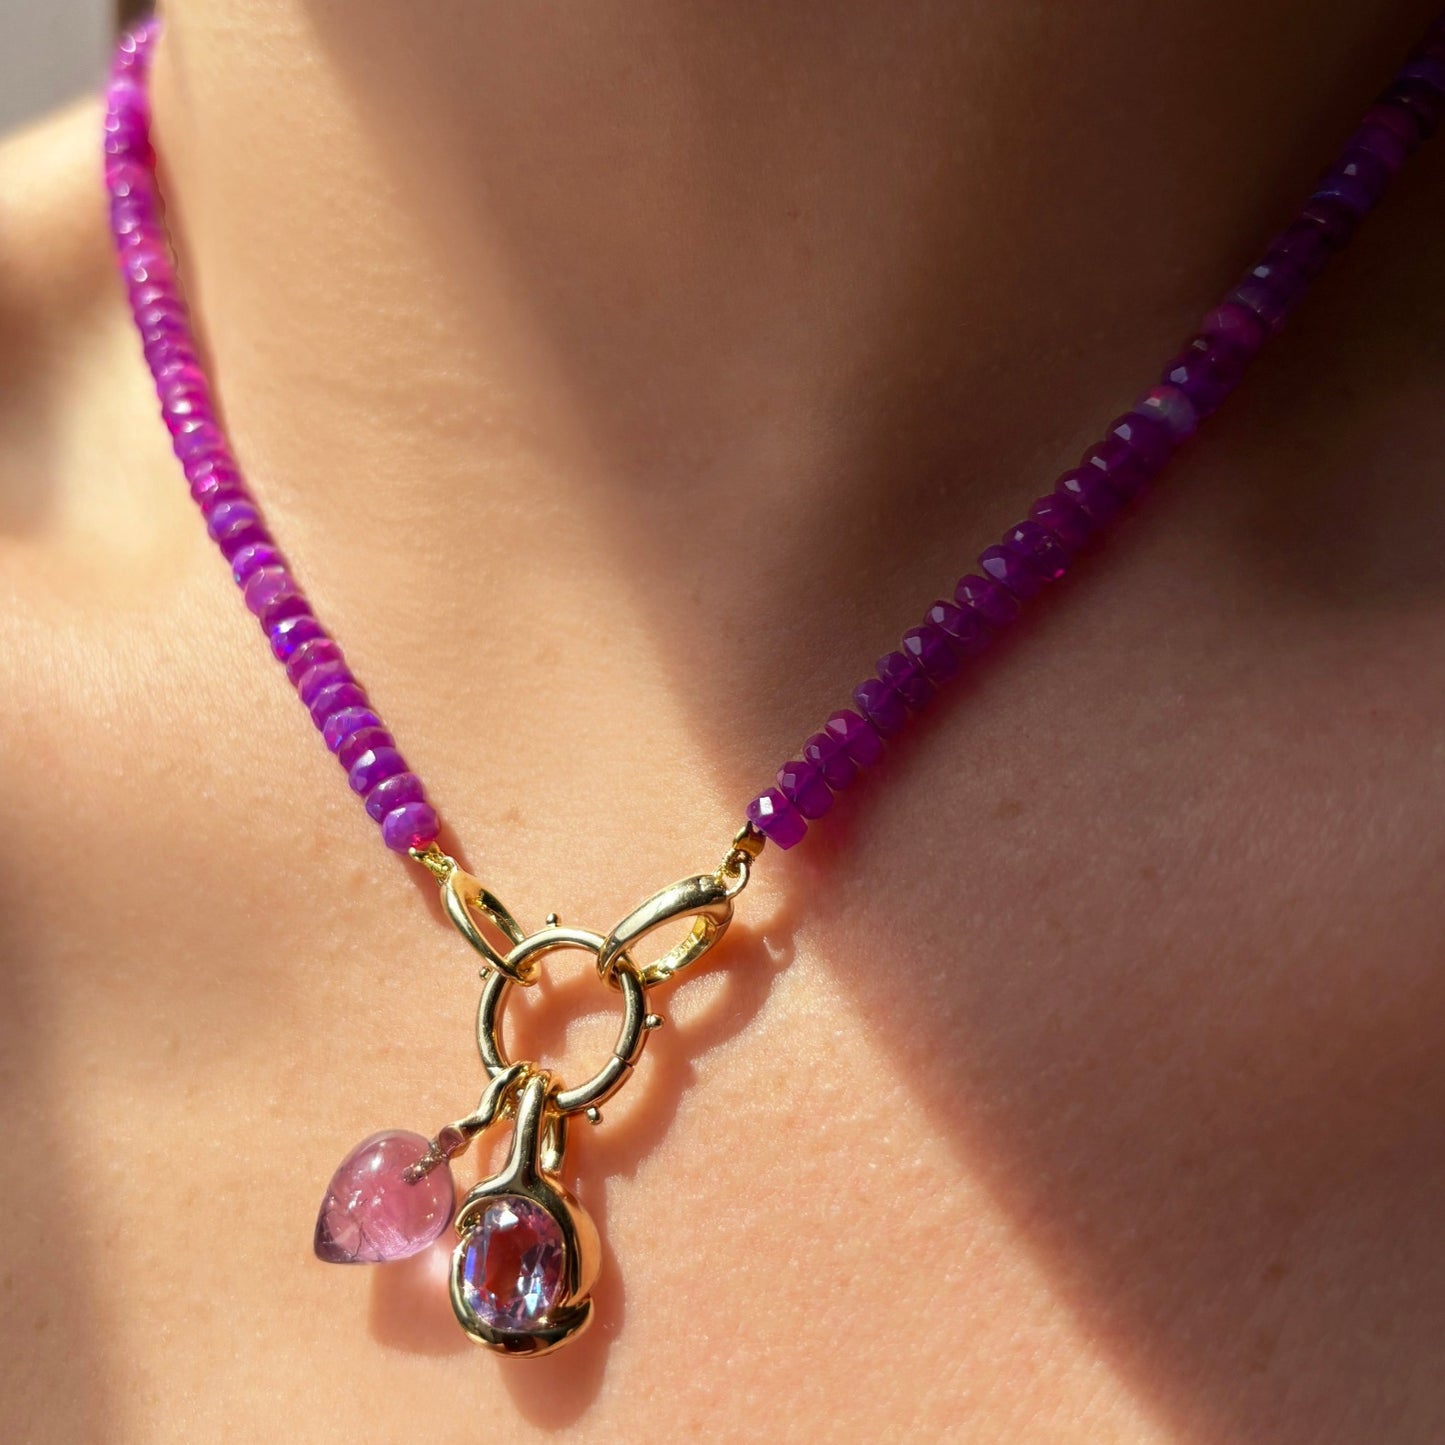 Shimmering beaded necklace made of faceted opals in shades of fuchsia pink on a gold linking ovals clasp. Styled on a neck layered with the beaded round charm lock, amethysts molten knot charm and acorn charm. 